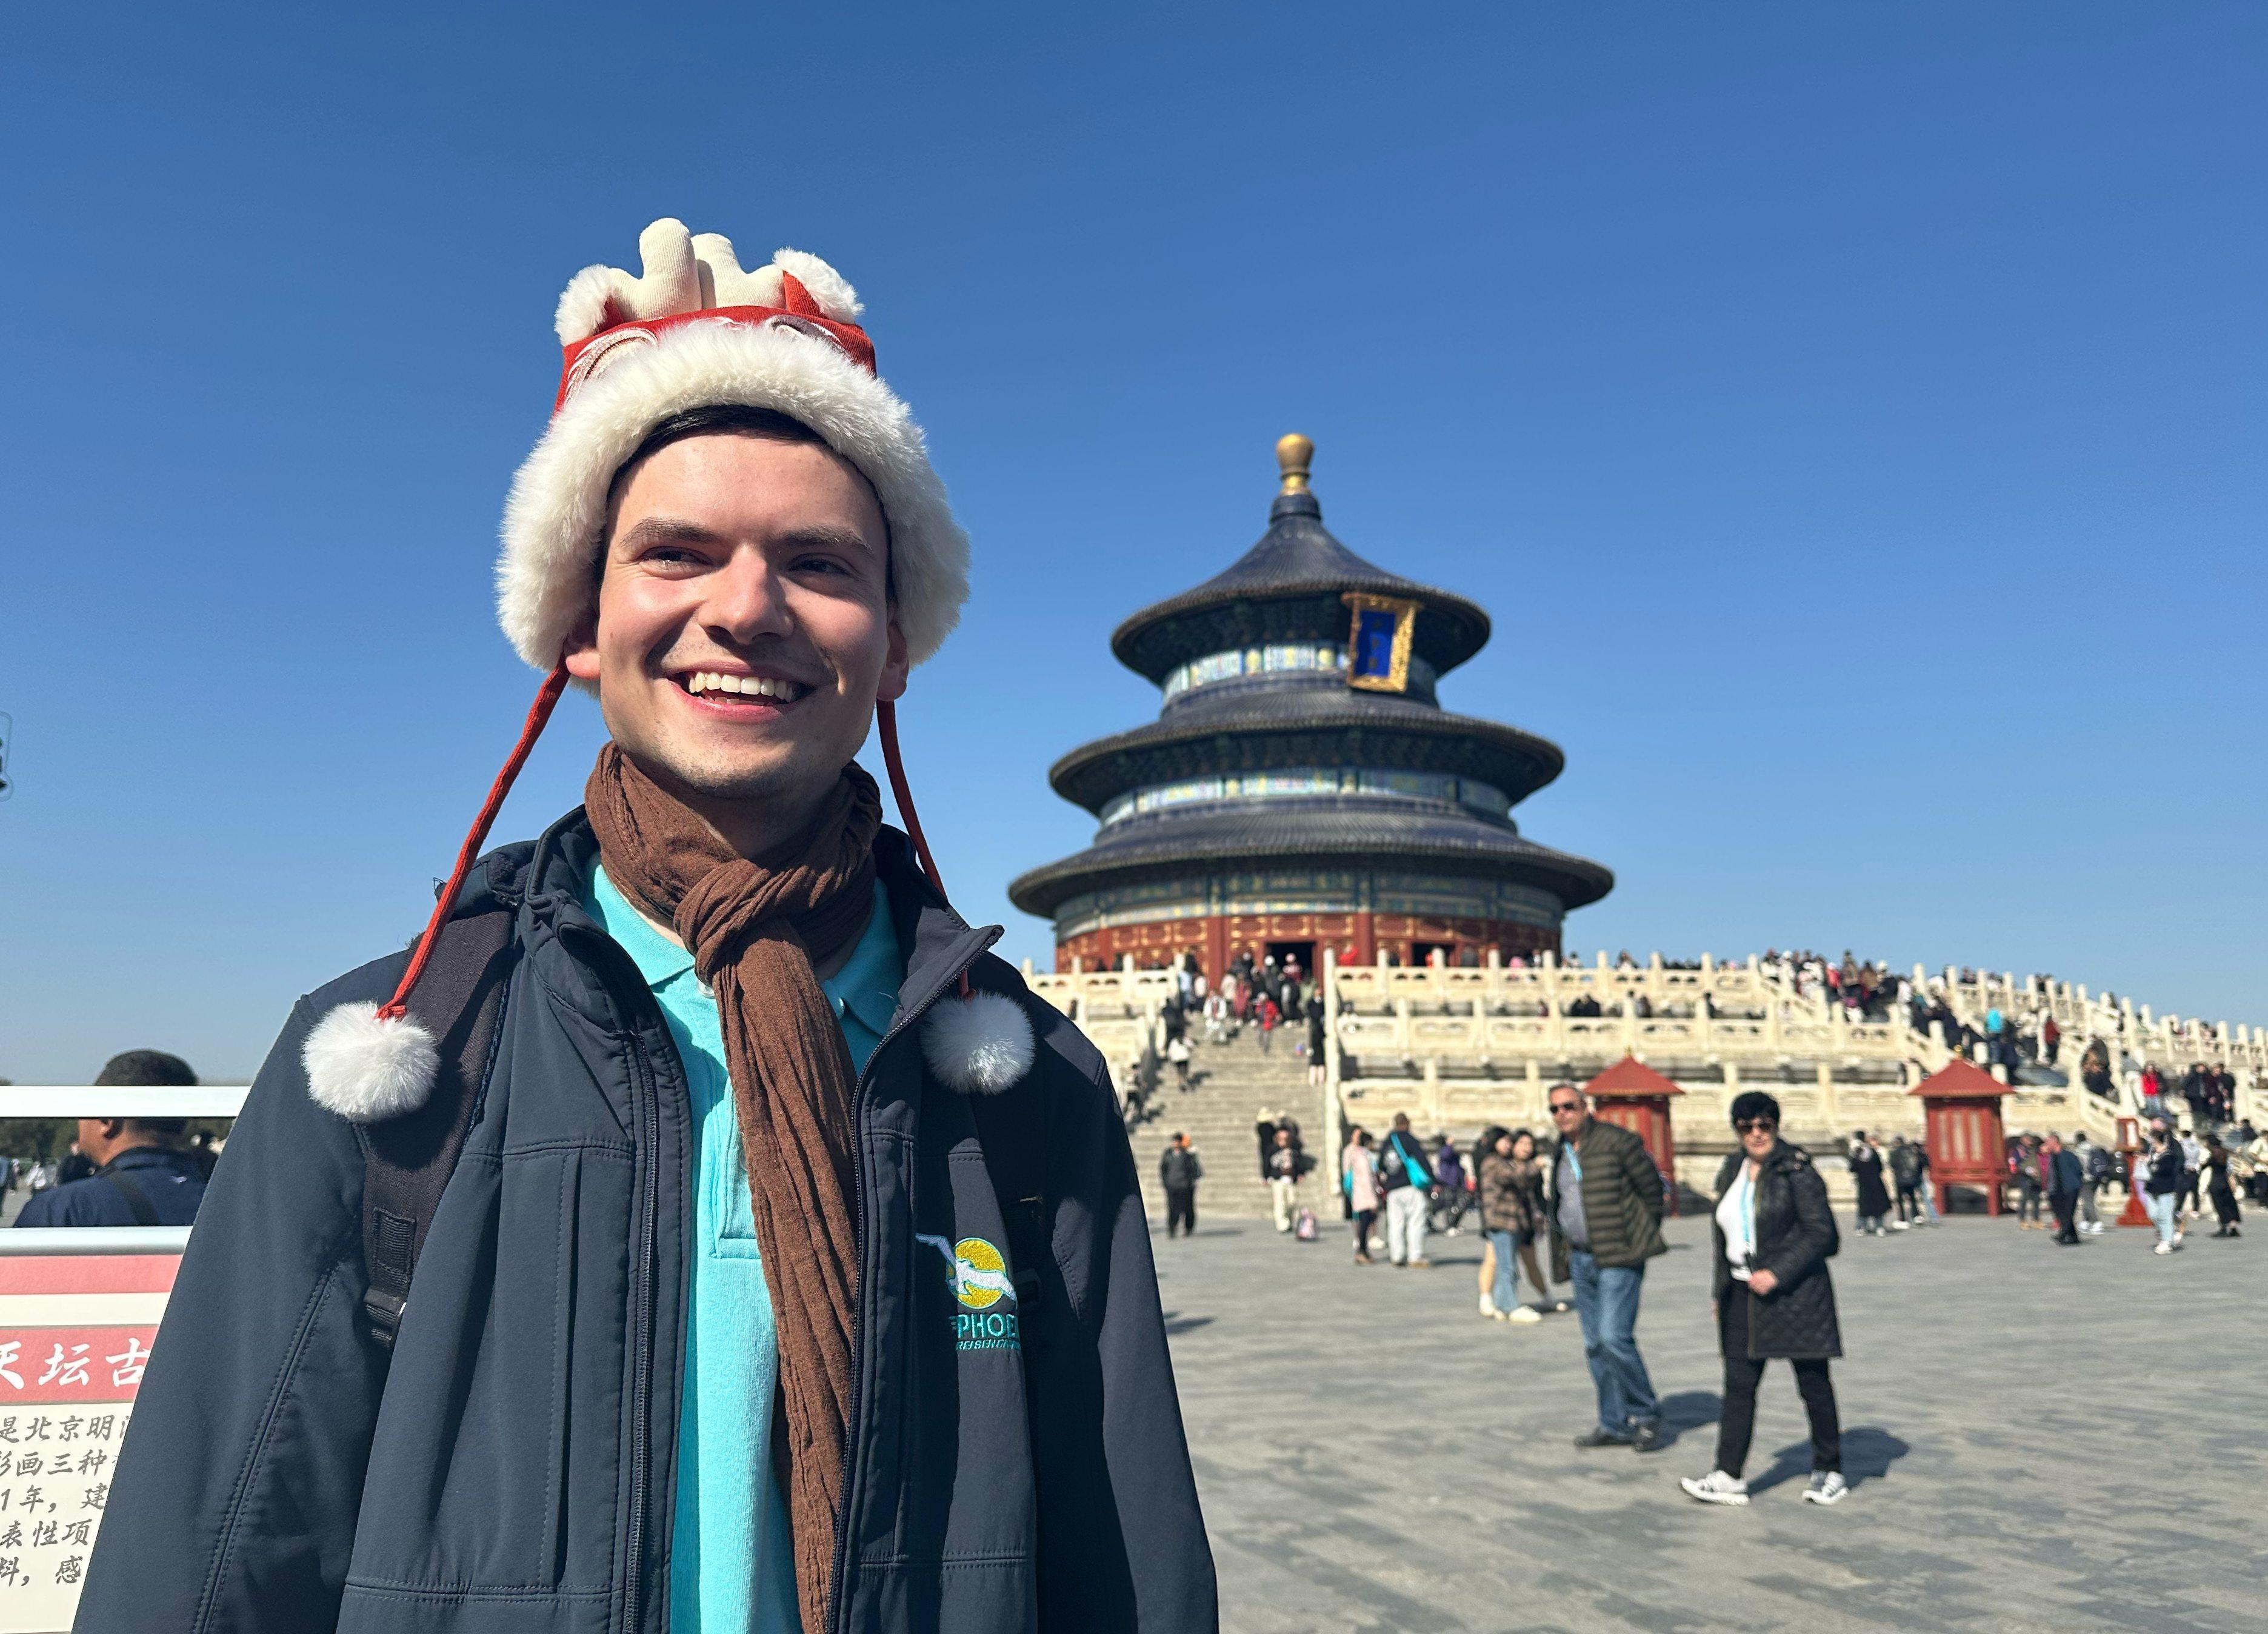 A German tourist visits the Temple of Heaven in Beijing on March 20. Since December, China has allowed travellers from Germany to enter without a visa for 15 days for business, tourism, family visits and transit. Photo: Xinhua